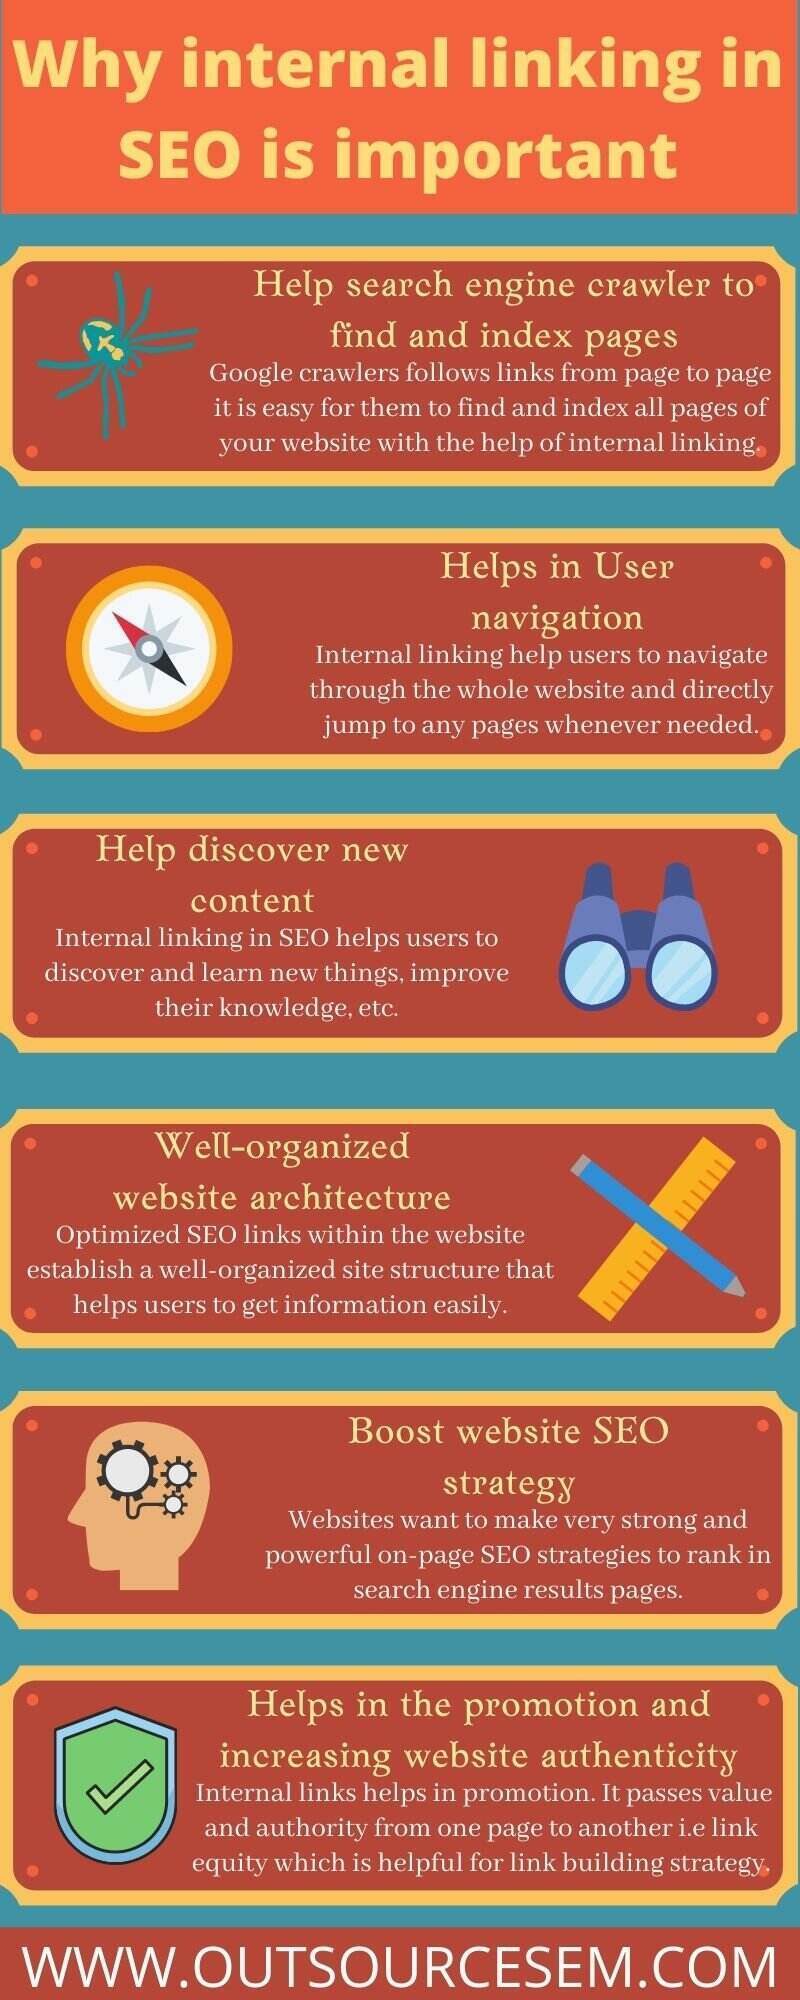 Infographic - importance of internal linking in SEO